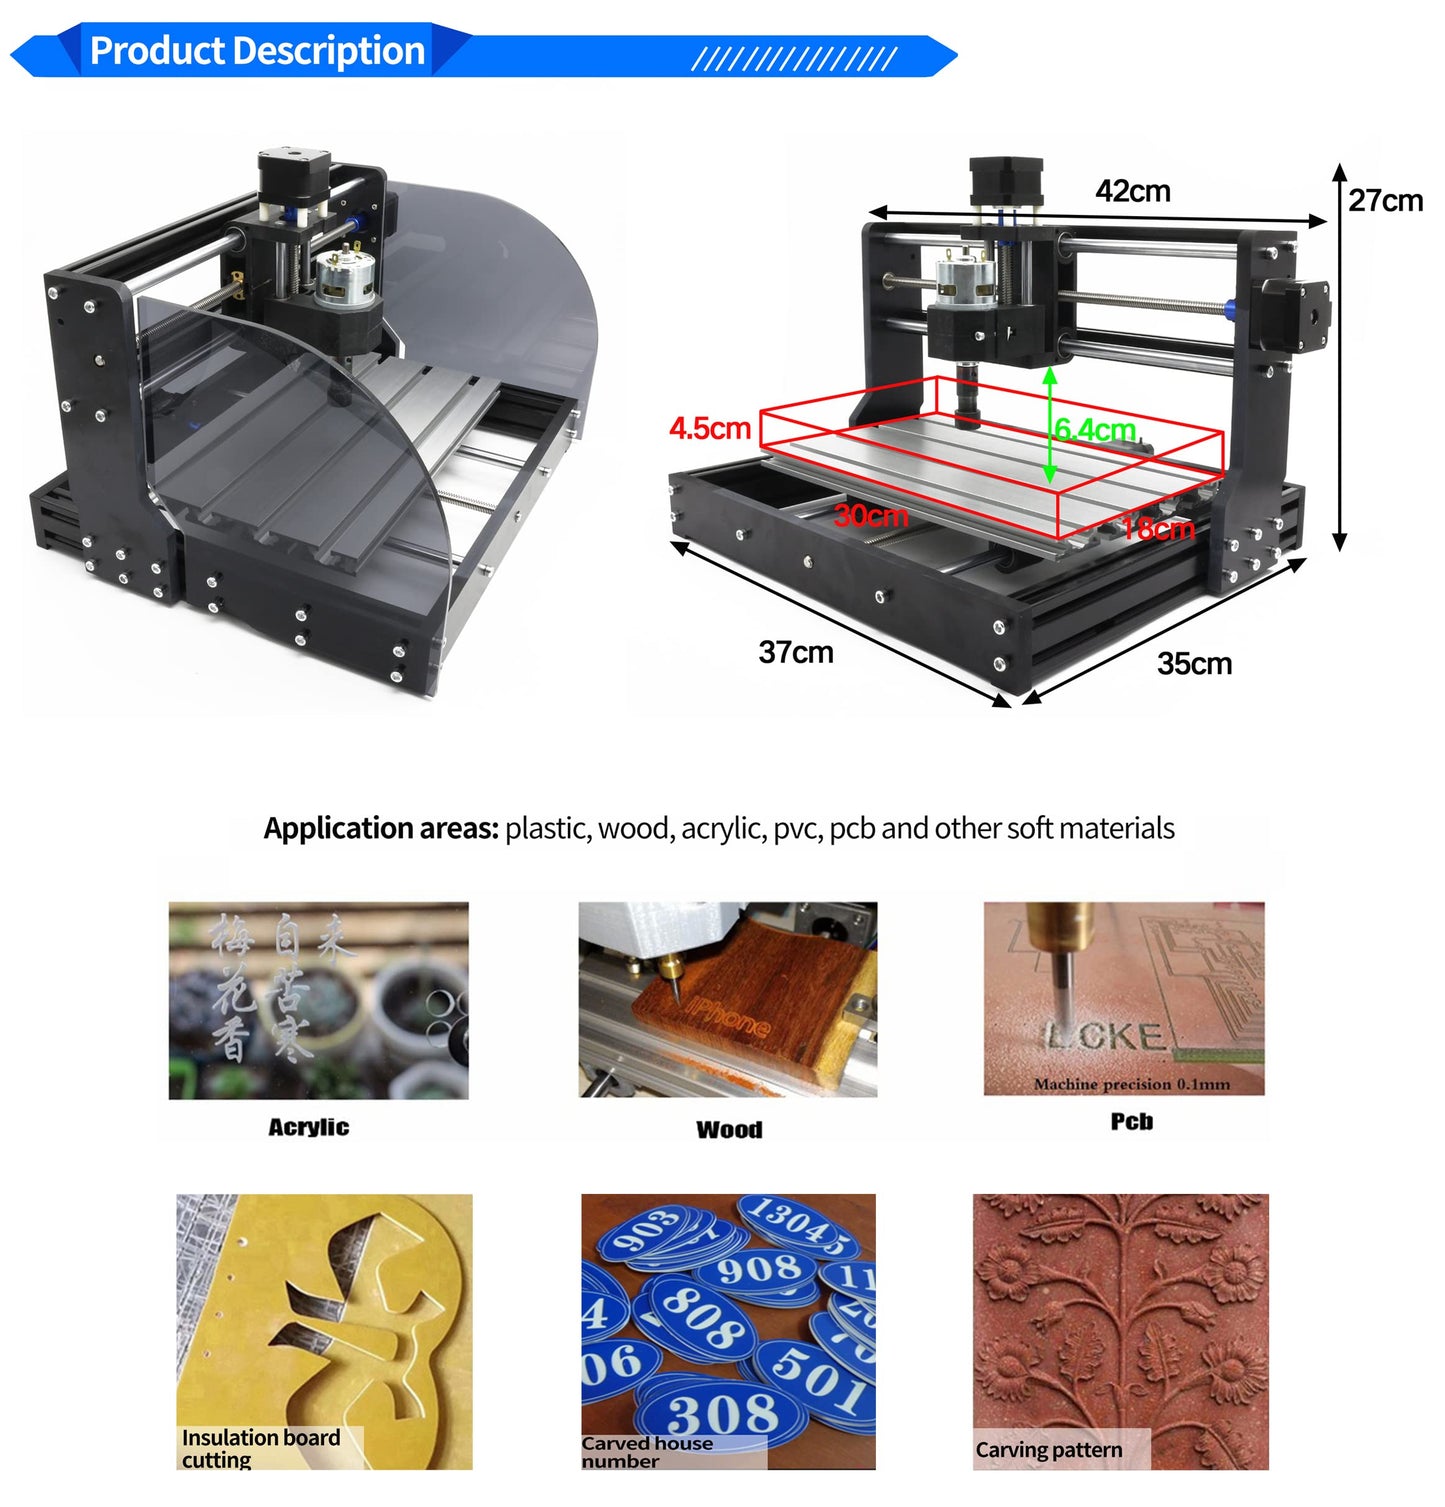 RATTMMOTOR CNC 3018 PRO MAX CNC Router Machine Kit DIY Mini CNC Wood Router Machine 3 Axis GRBL Control Engraver Milling Cutting Machine Working Area